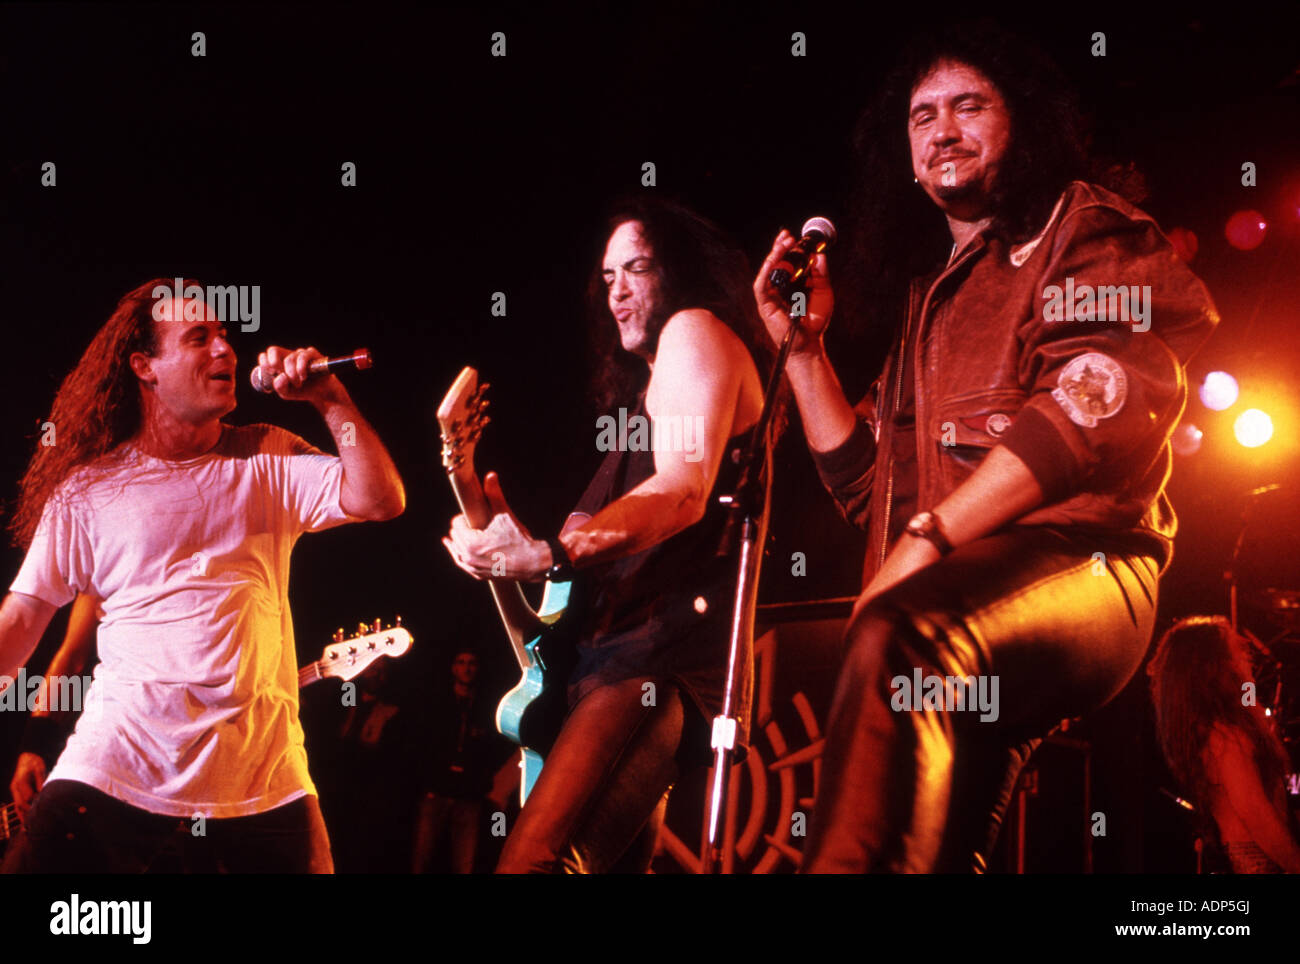 ANTHRAX - US rock group about 1989 Stock Photo